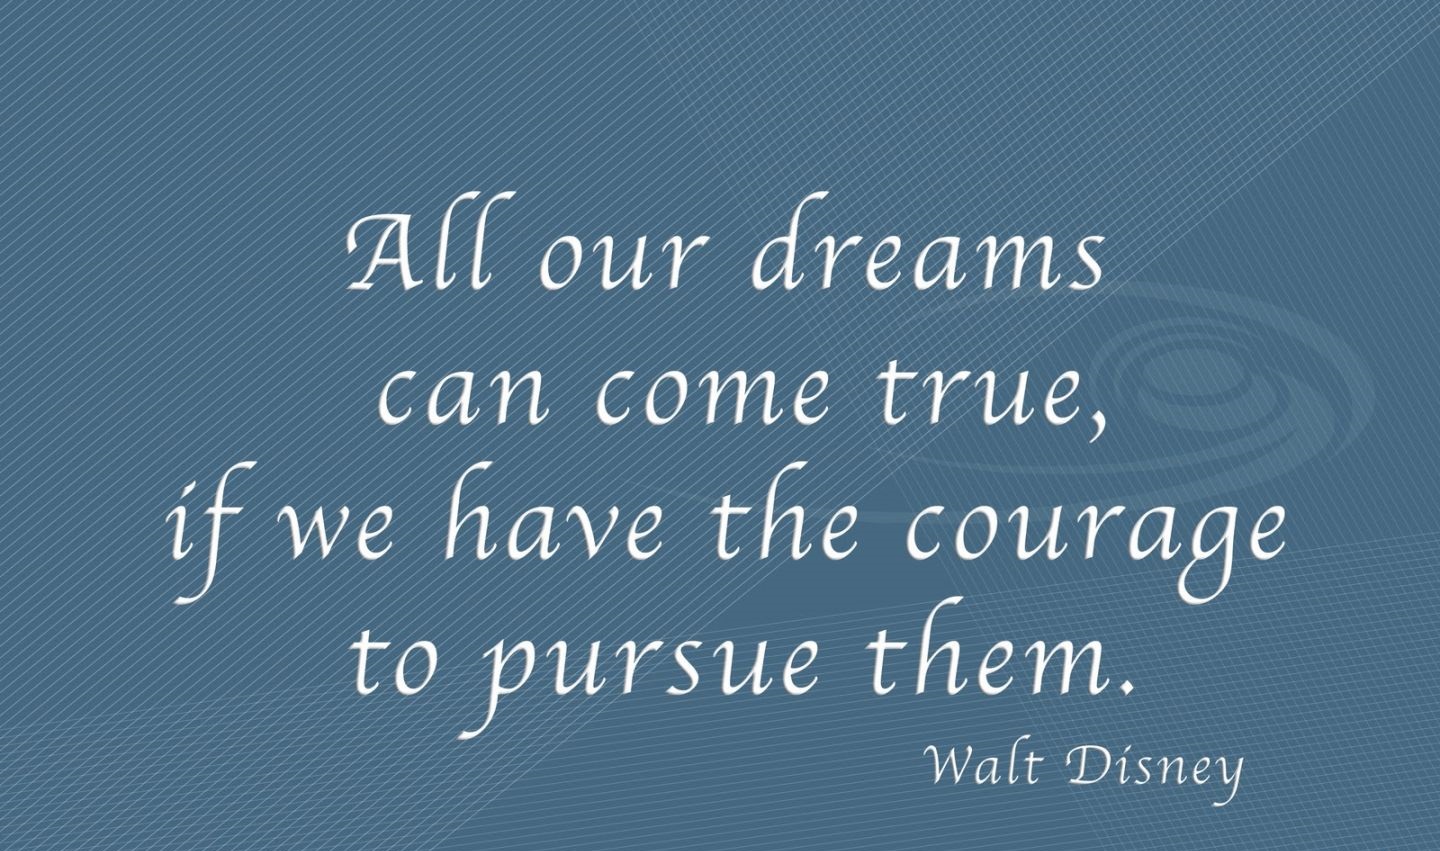 Wallpaper with Quote on Dreams By Walt Disney